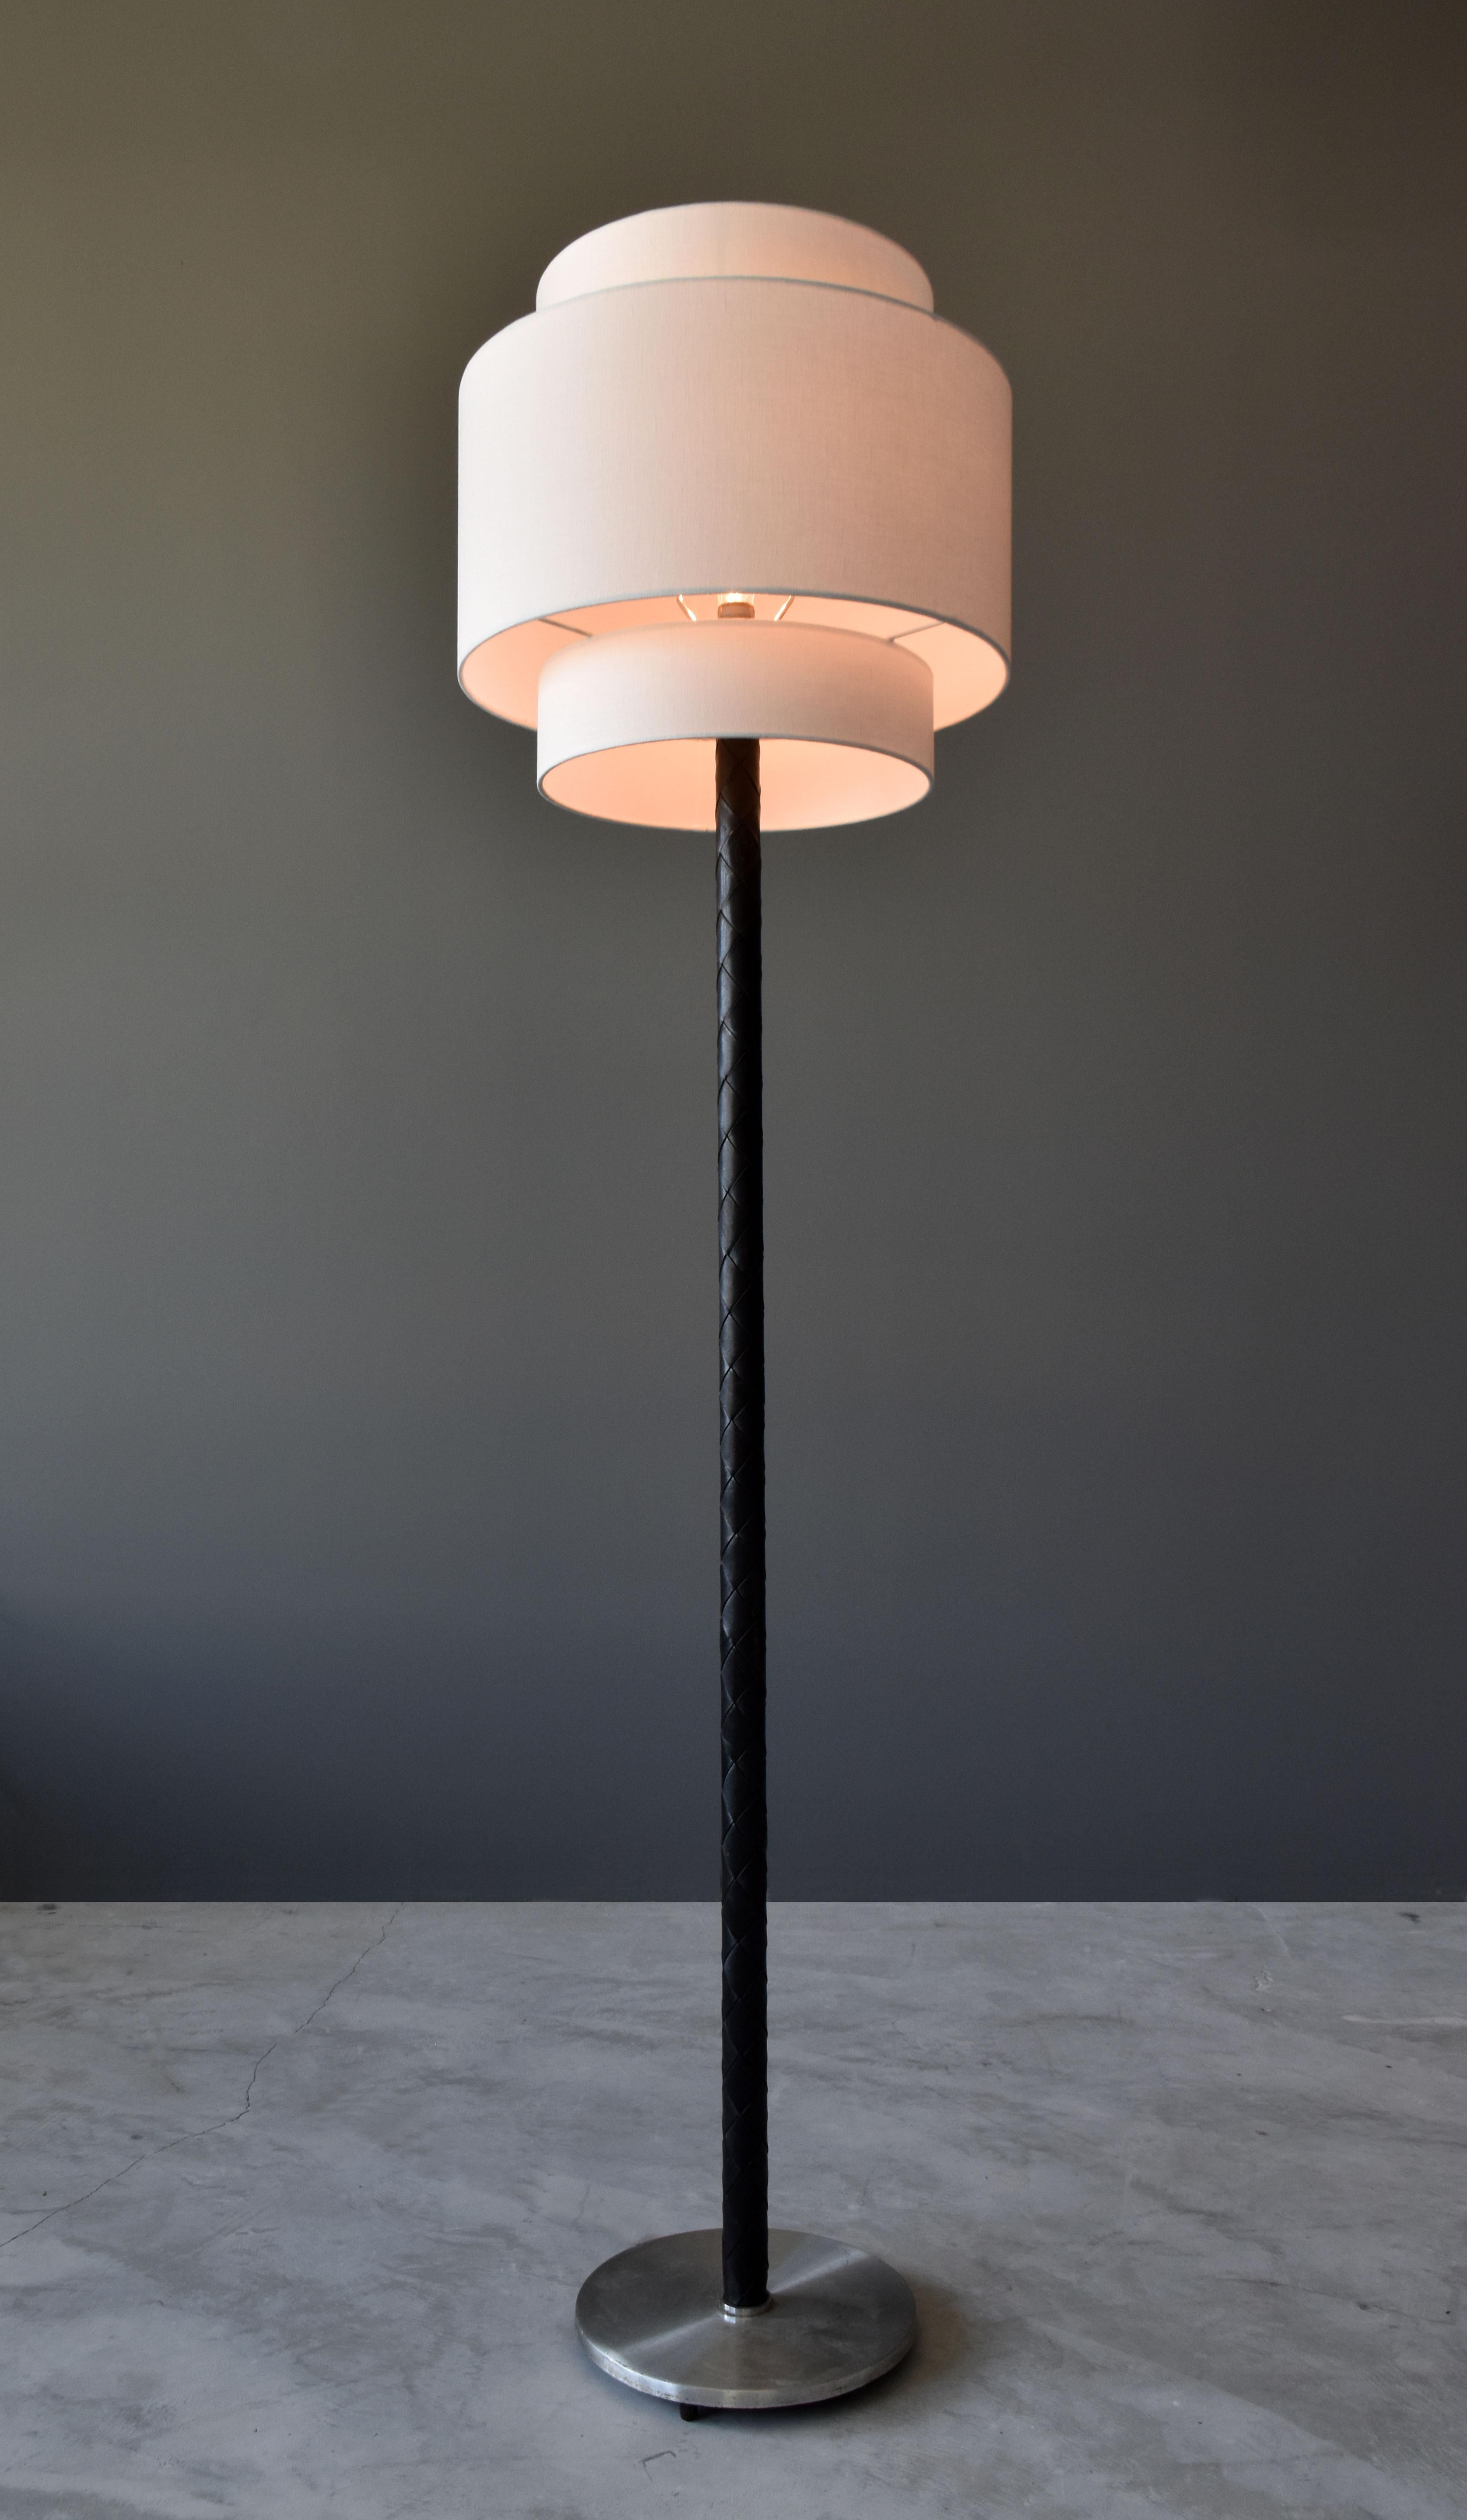 A Danish modernist floor lamp Designed by Jo Hammerborg for Fog & Mørup. Base of stainless steel, rod covered in braided black dyed leather. Handmade two-tier drum screen.

Selection of materials and purity of form is similar to that contemporary